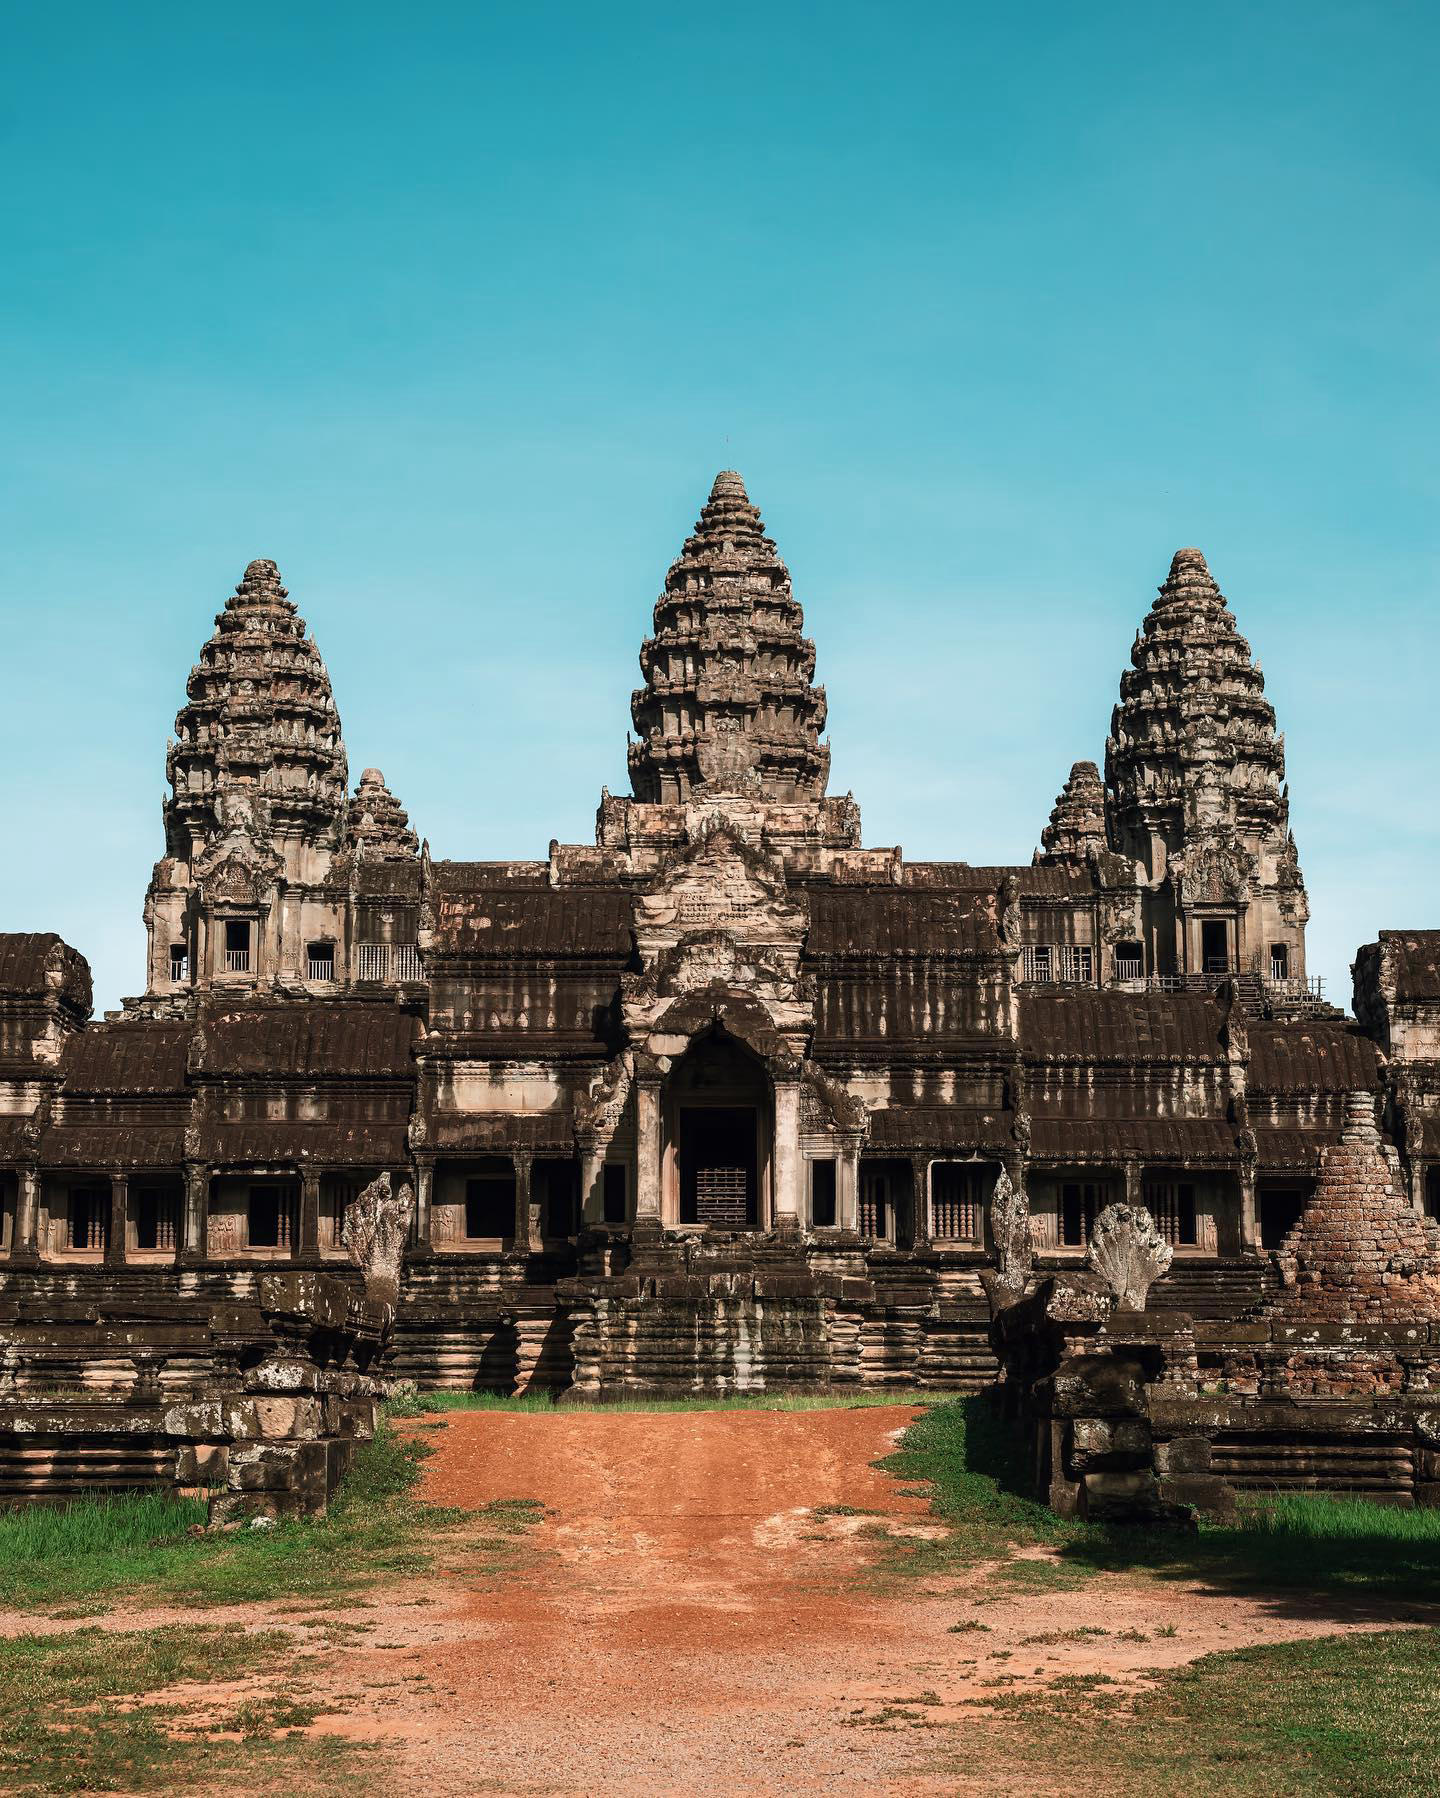 image  1 JEREMY AUSTIN - The ancient temples of Cambodia in Siem Reap are absolutely unreal